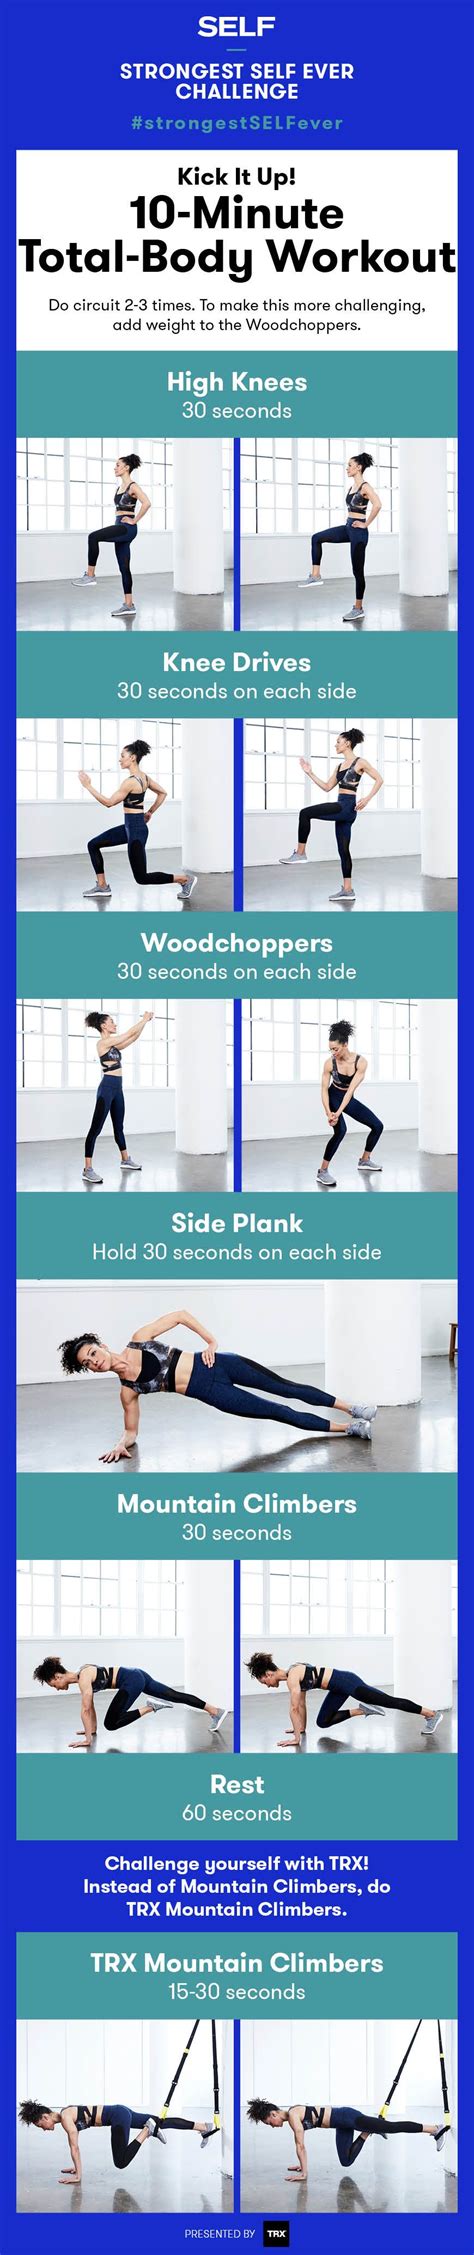 Kick It Up Strength Workout Strength Workout Total Body Workout Workout